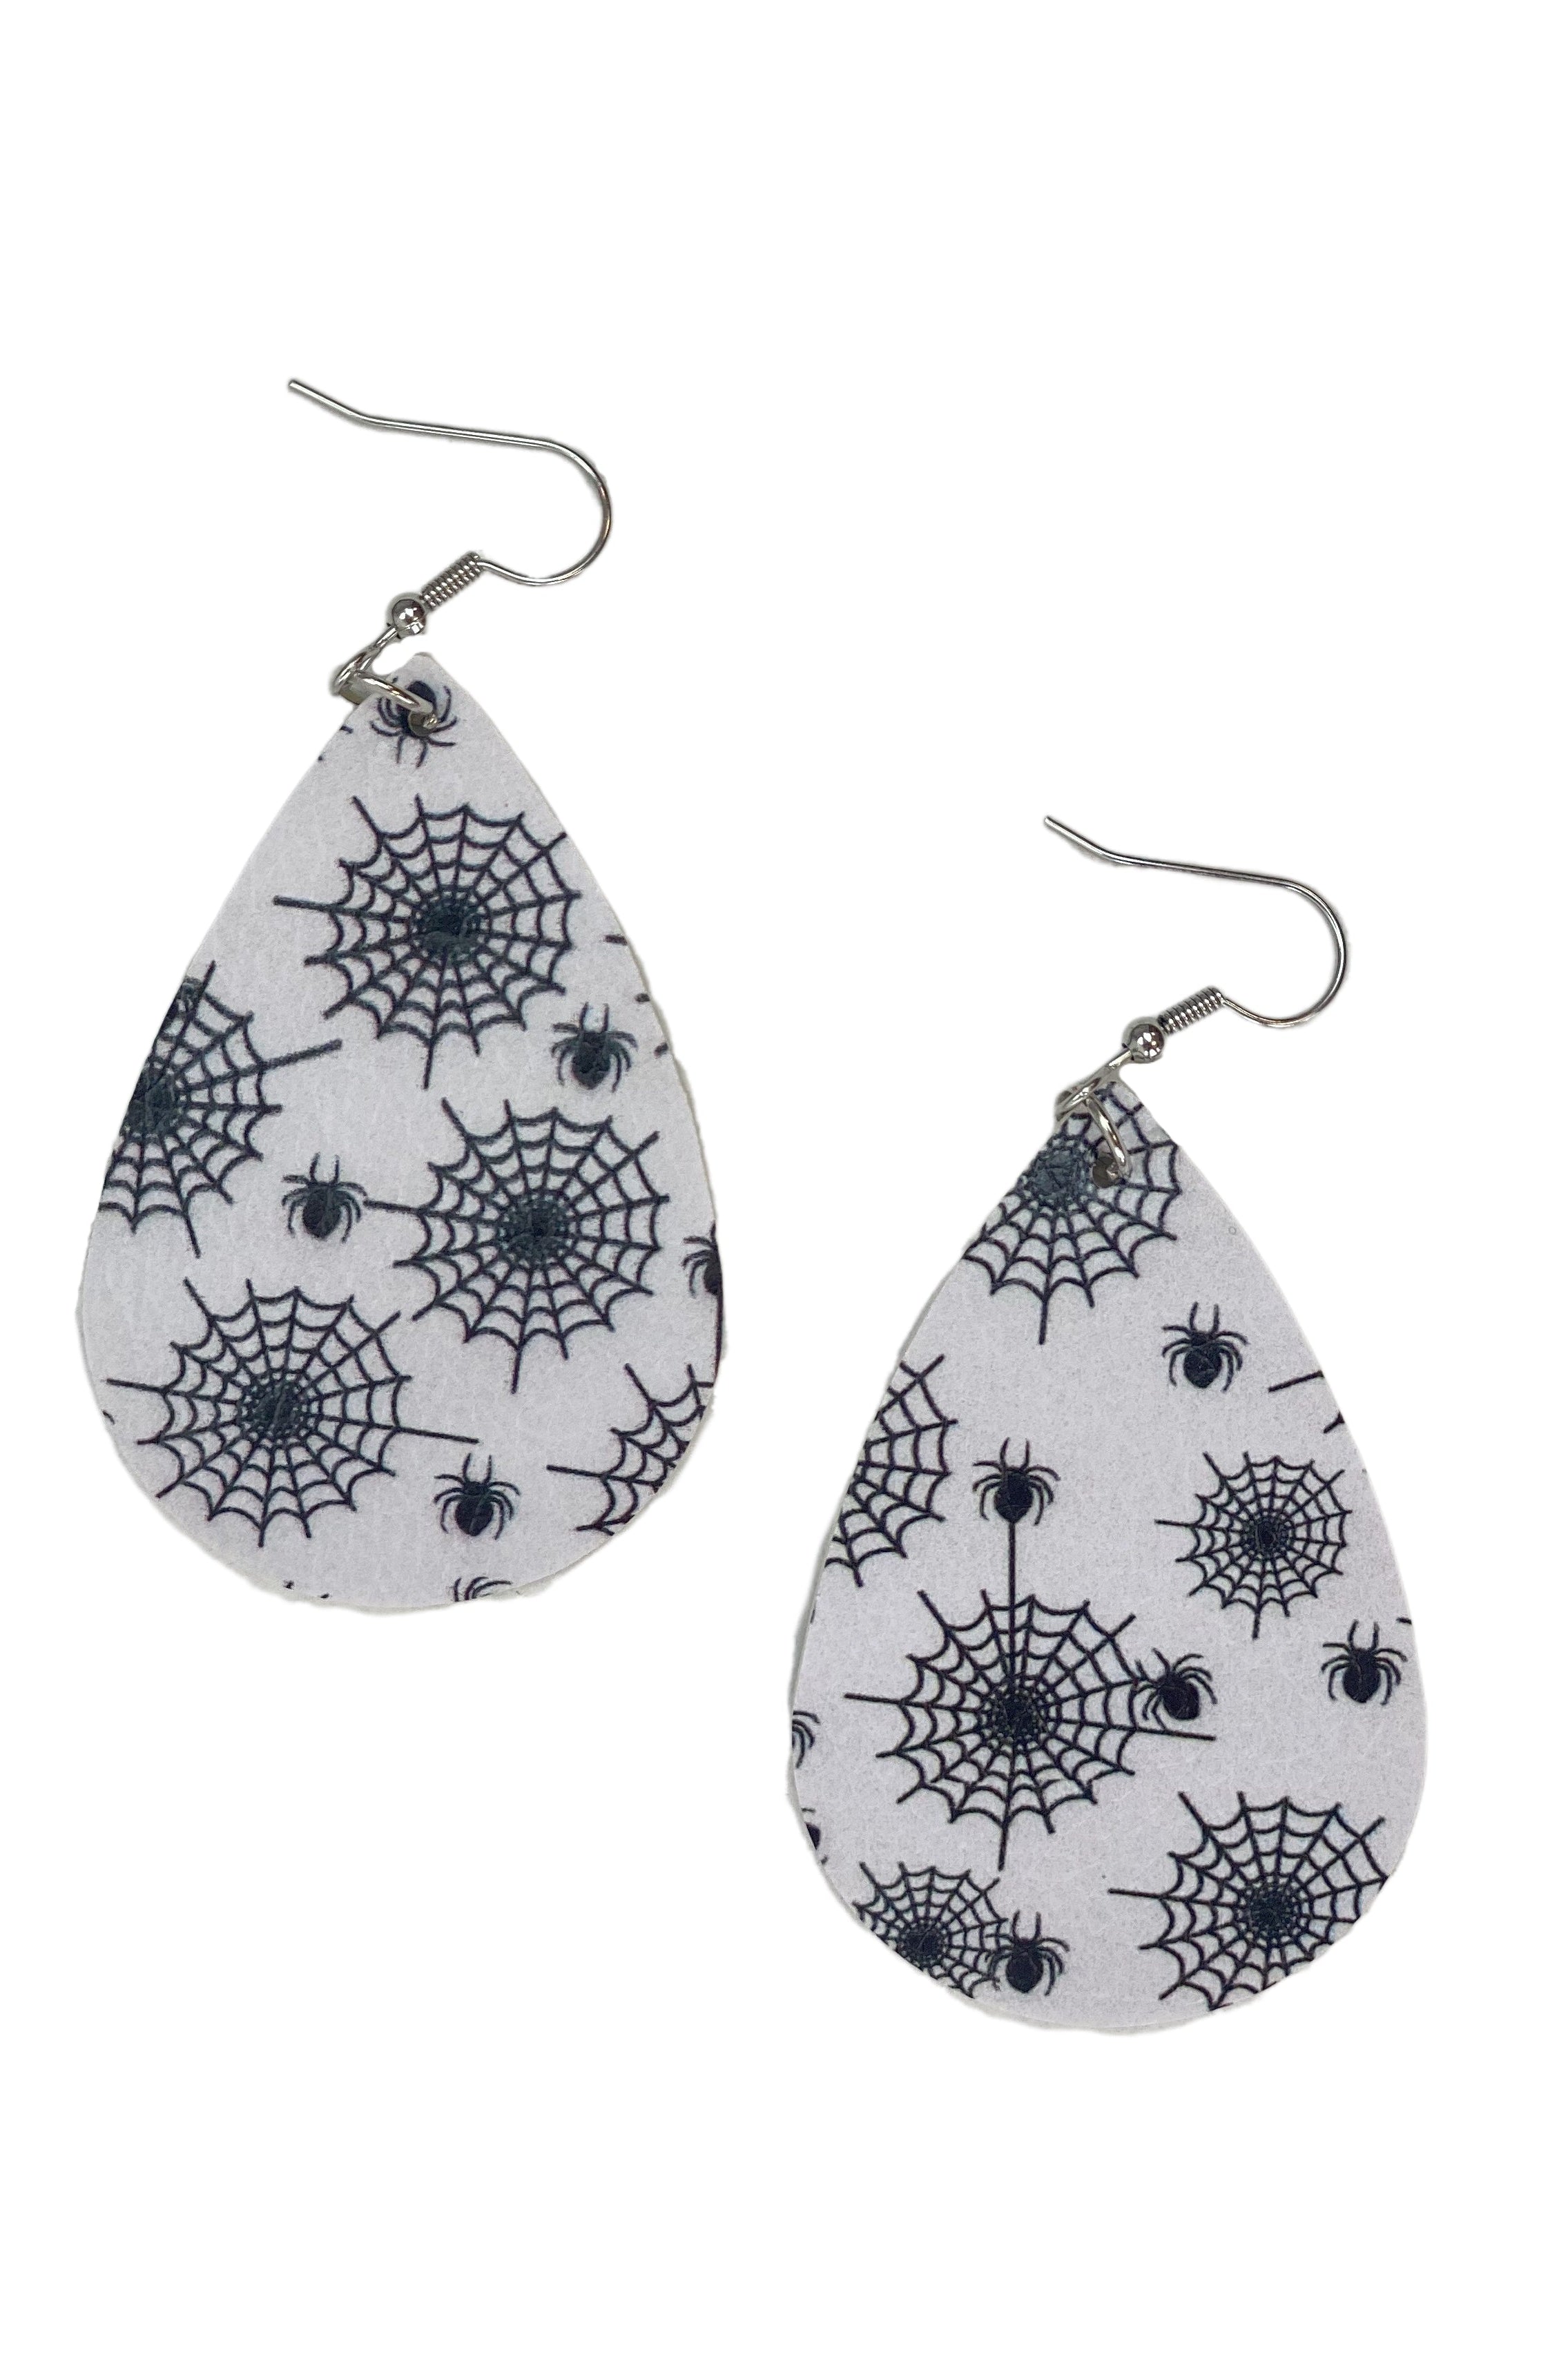 Caught In Your Web Teardrop Leather Earrings Accessories Boutique Simplified